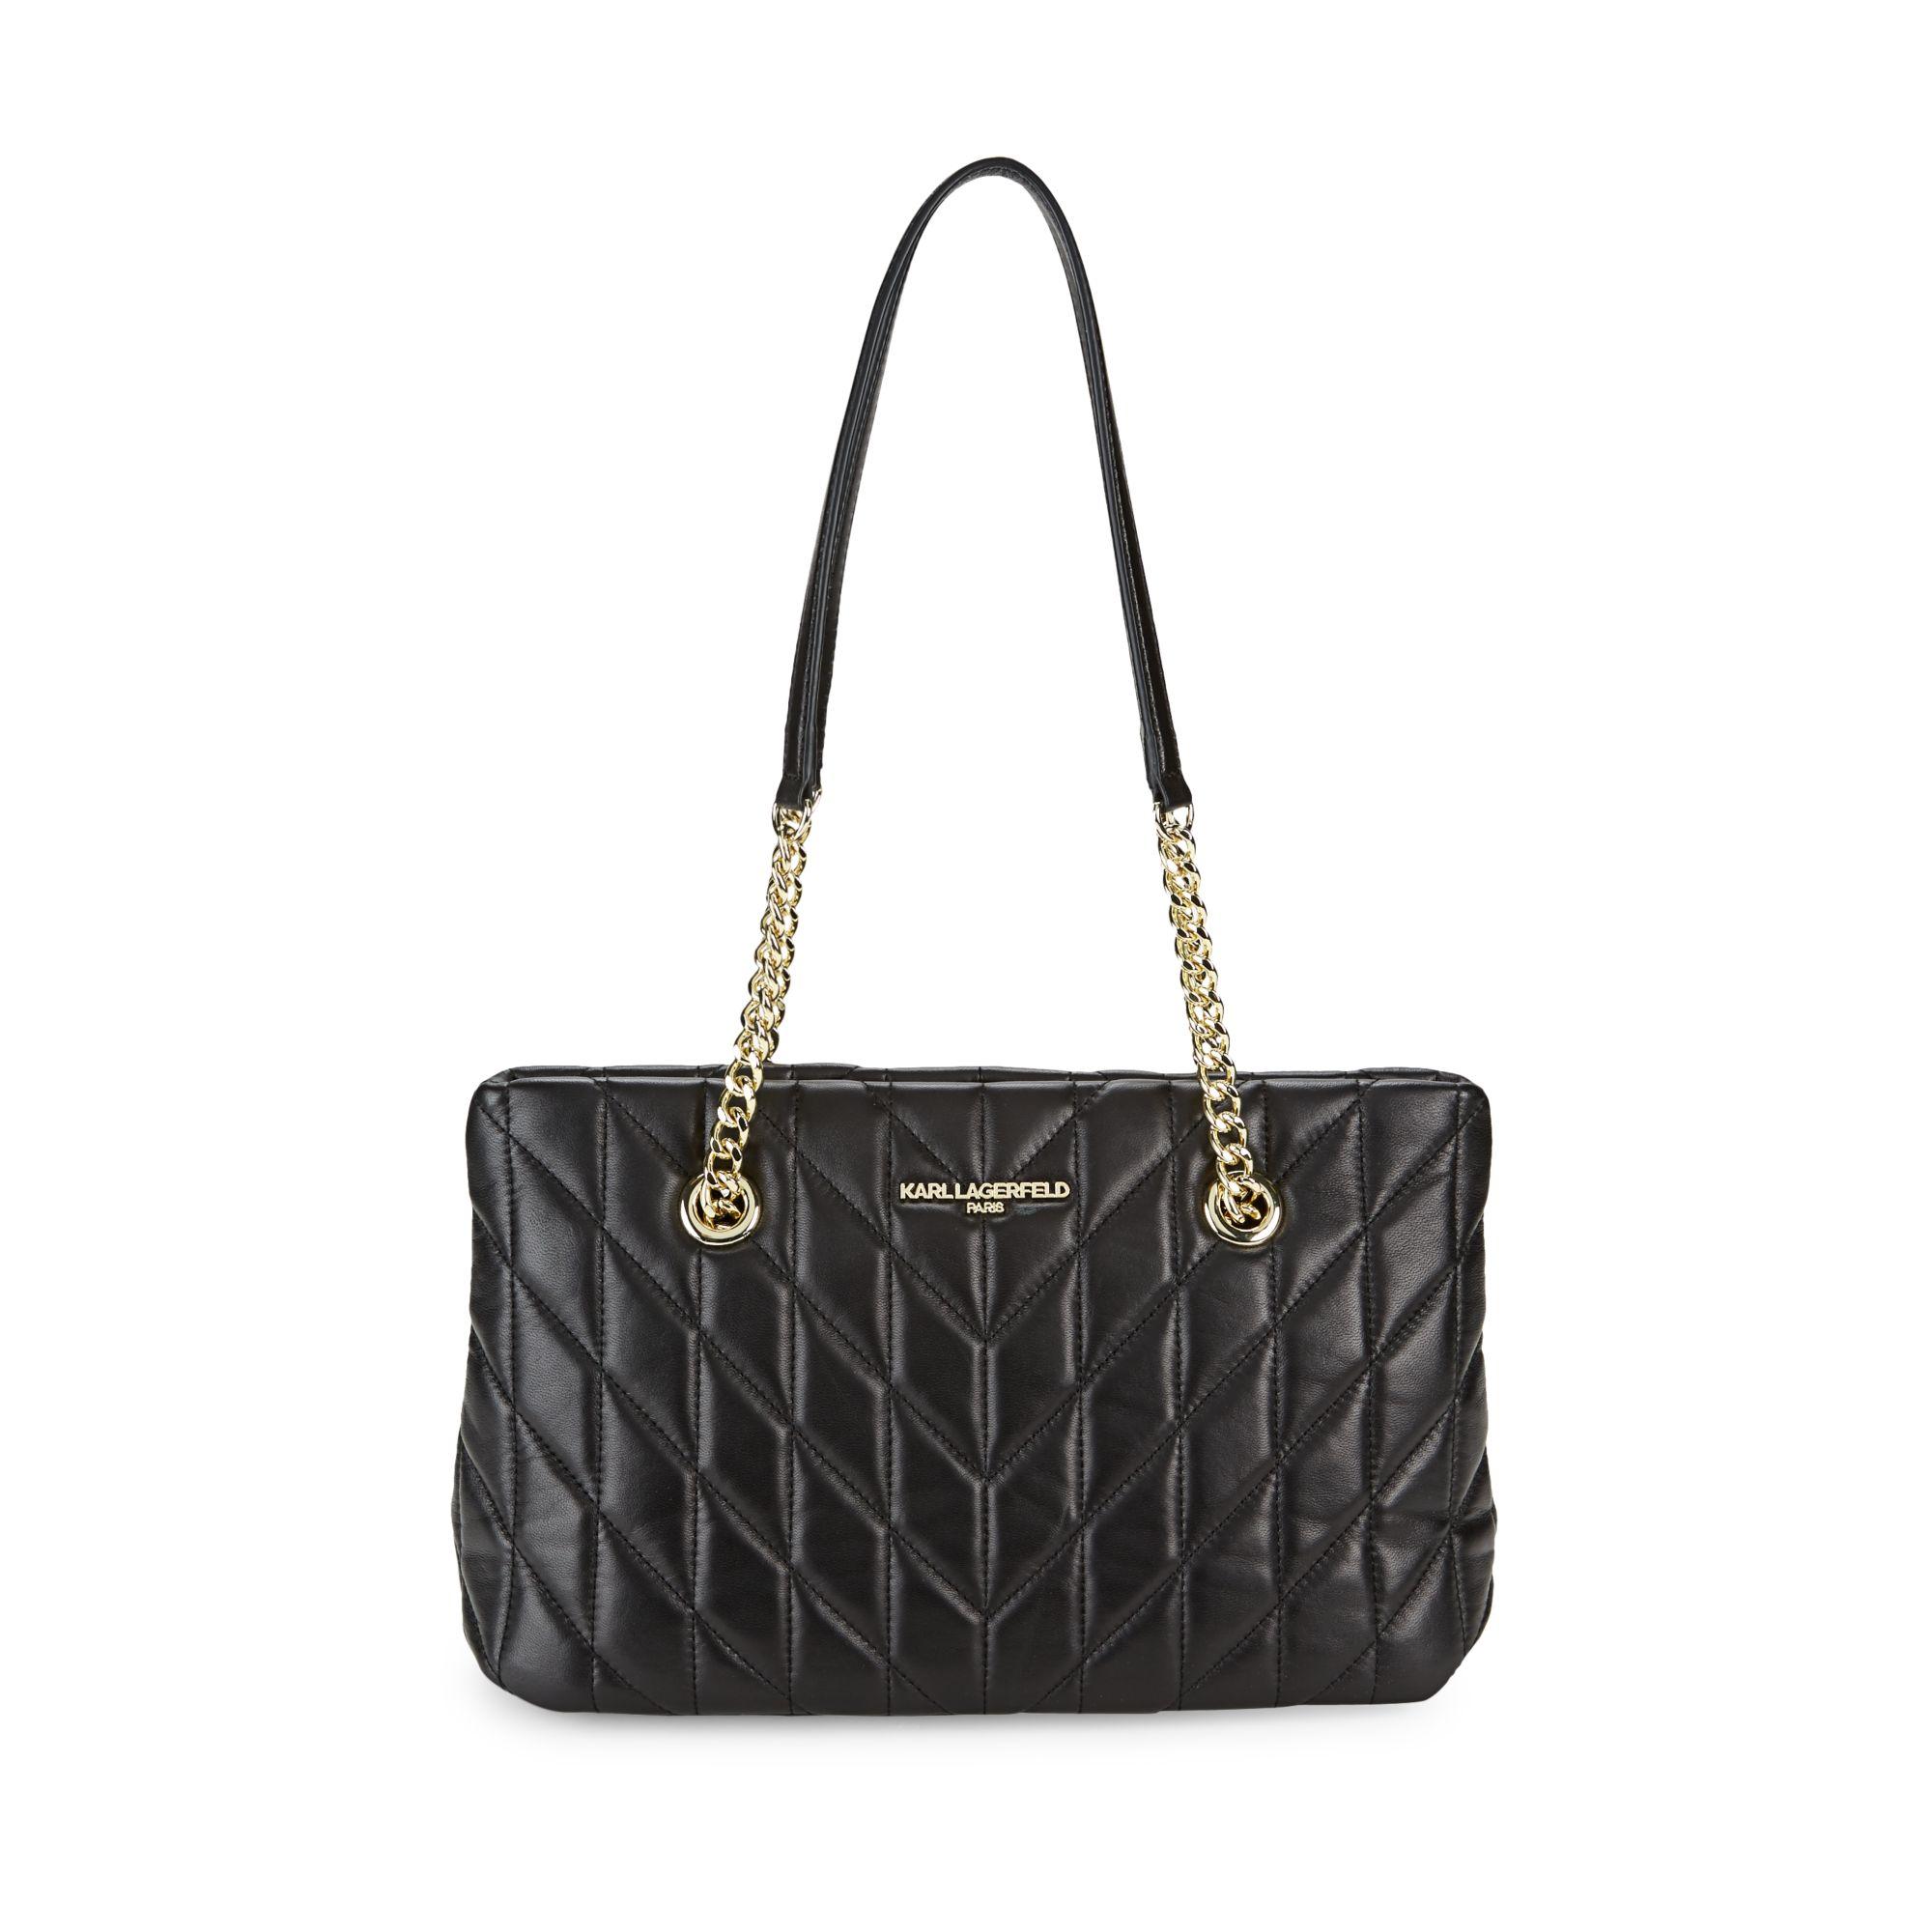 Karl Lagerfeld Quilted Leather Chain Tote in Black - Lyst